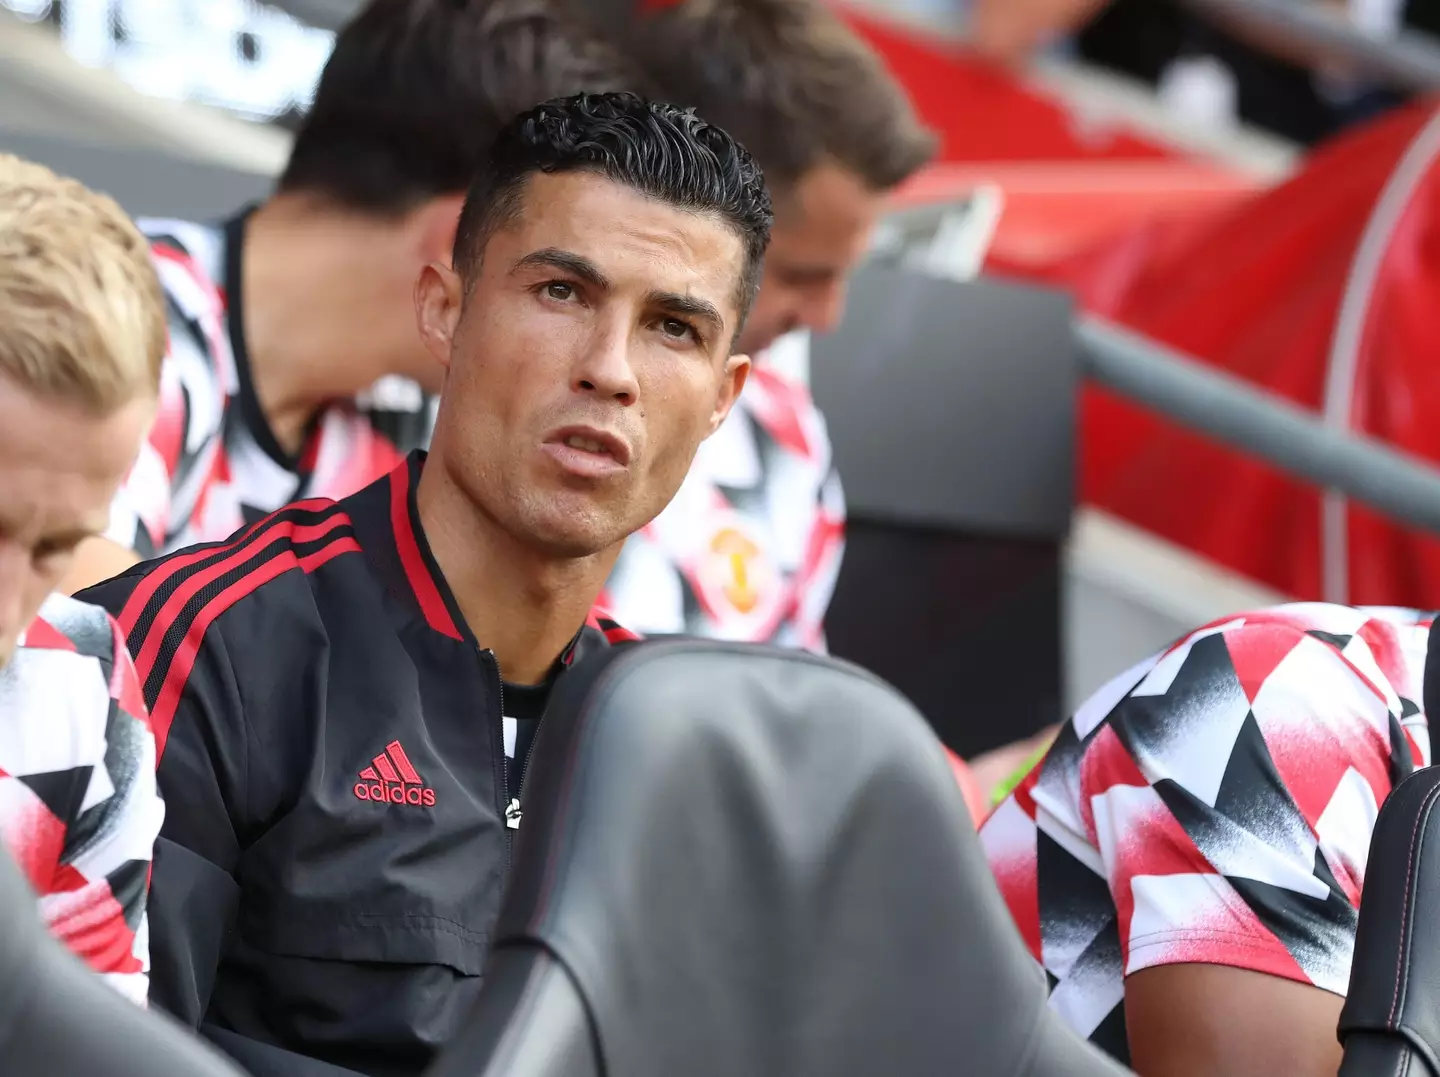 Ronaldo on the bench during Saturday's 1-0 win over Southampton. (Image